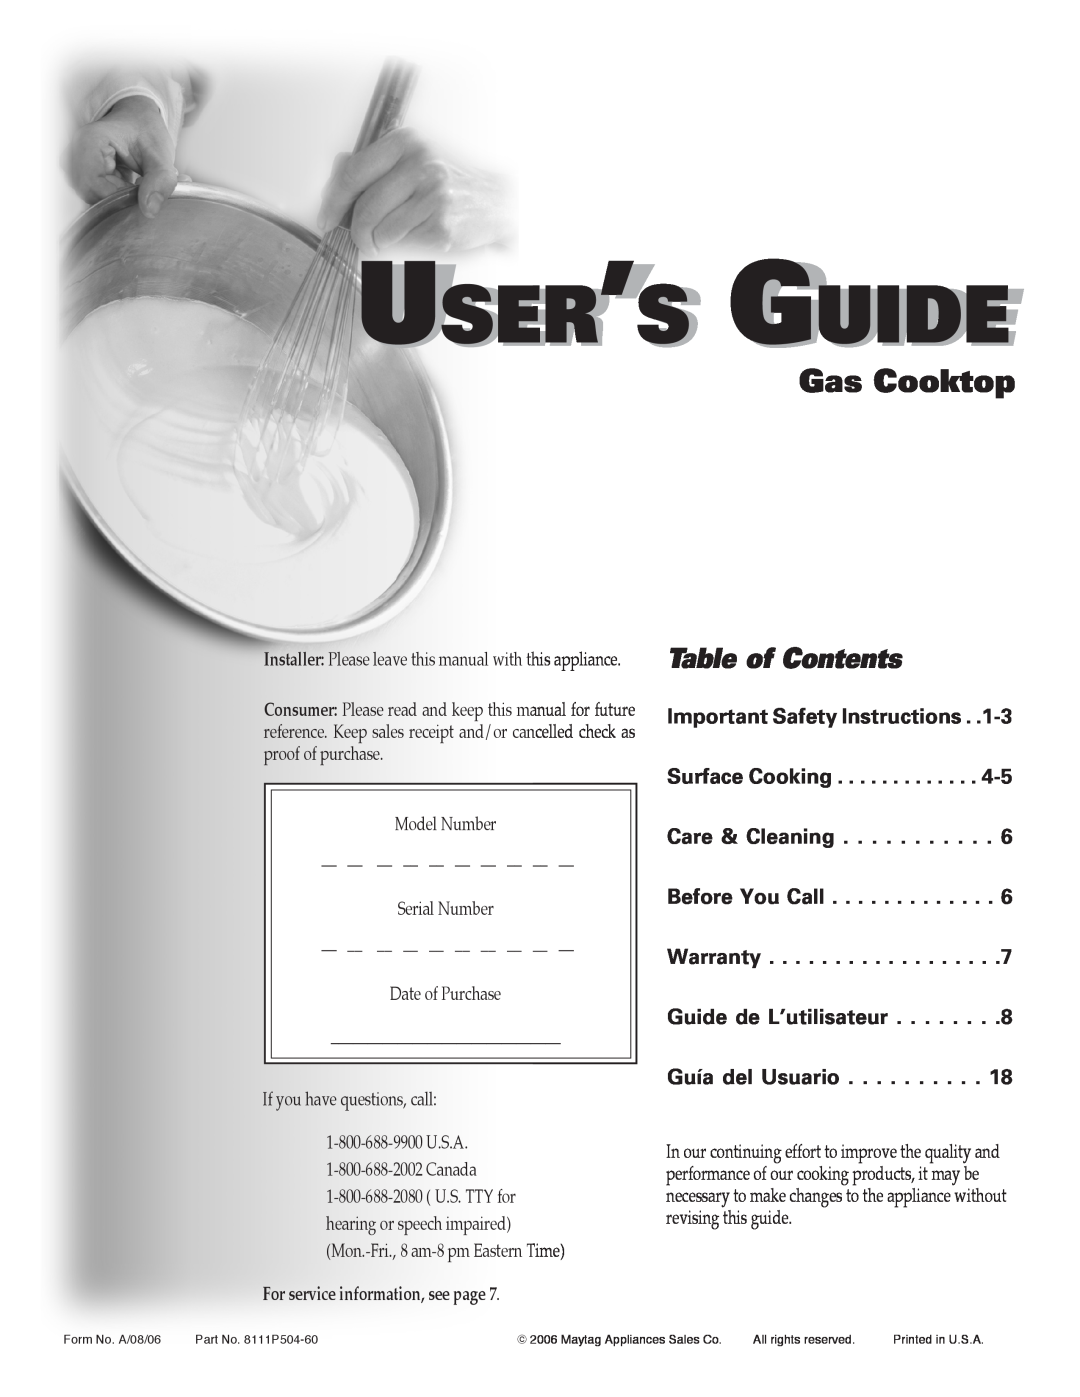 Maytag 8111P504-60 important safety instructions User’S Guide, Gas Cooktop, Table of Contents 